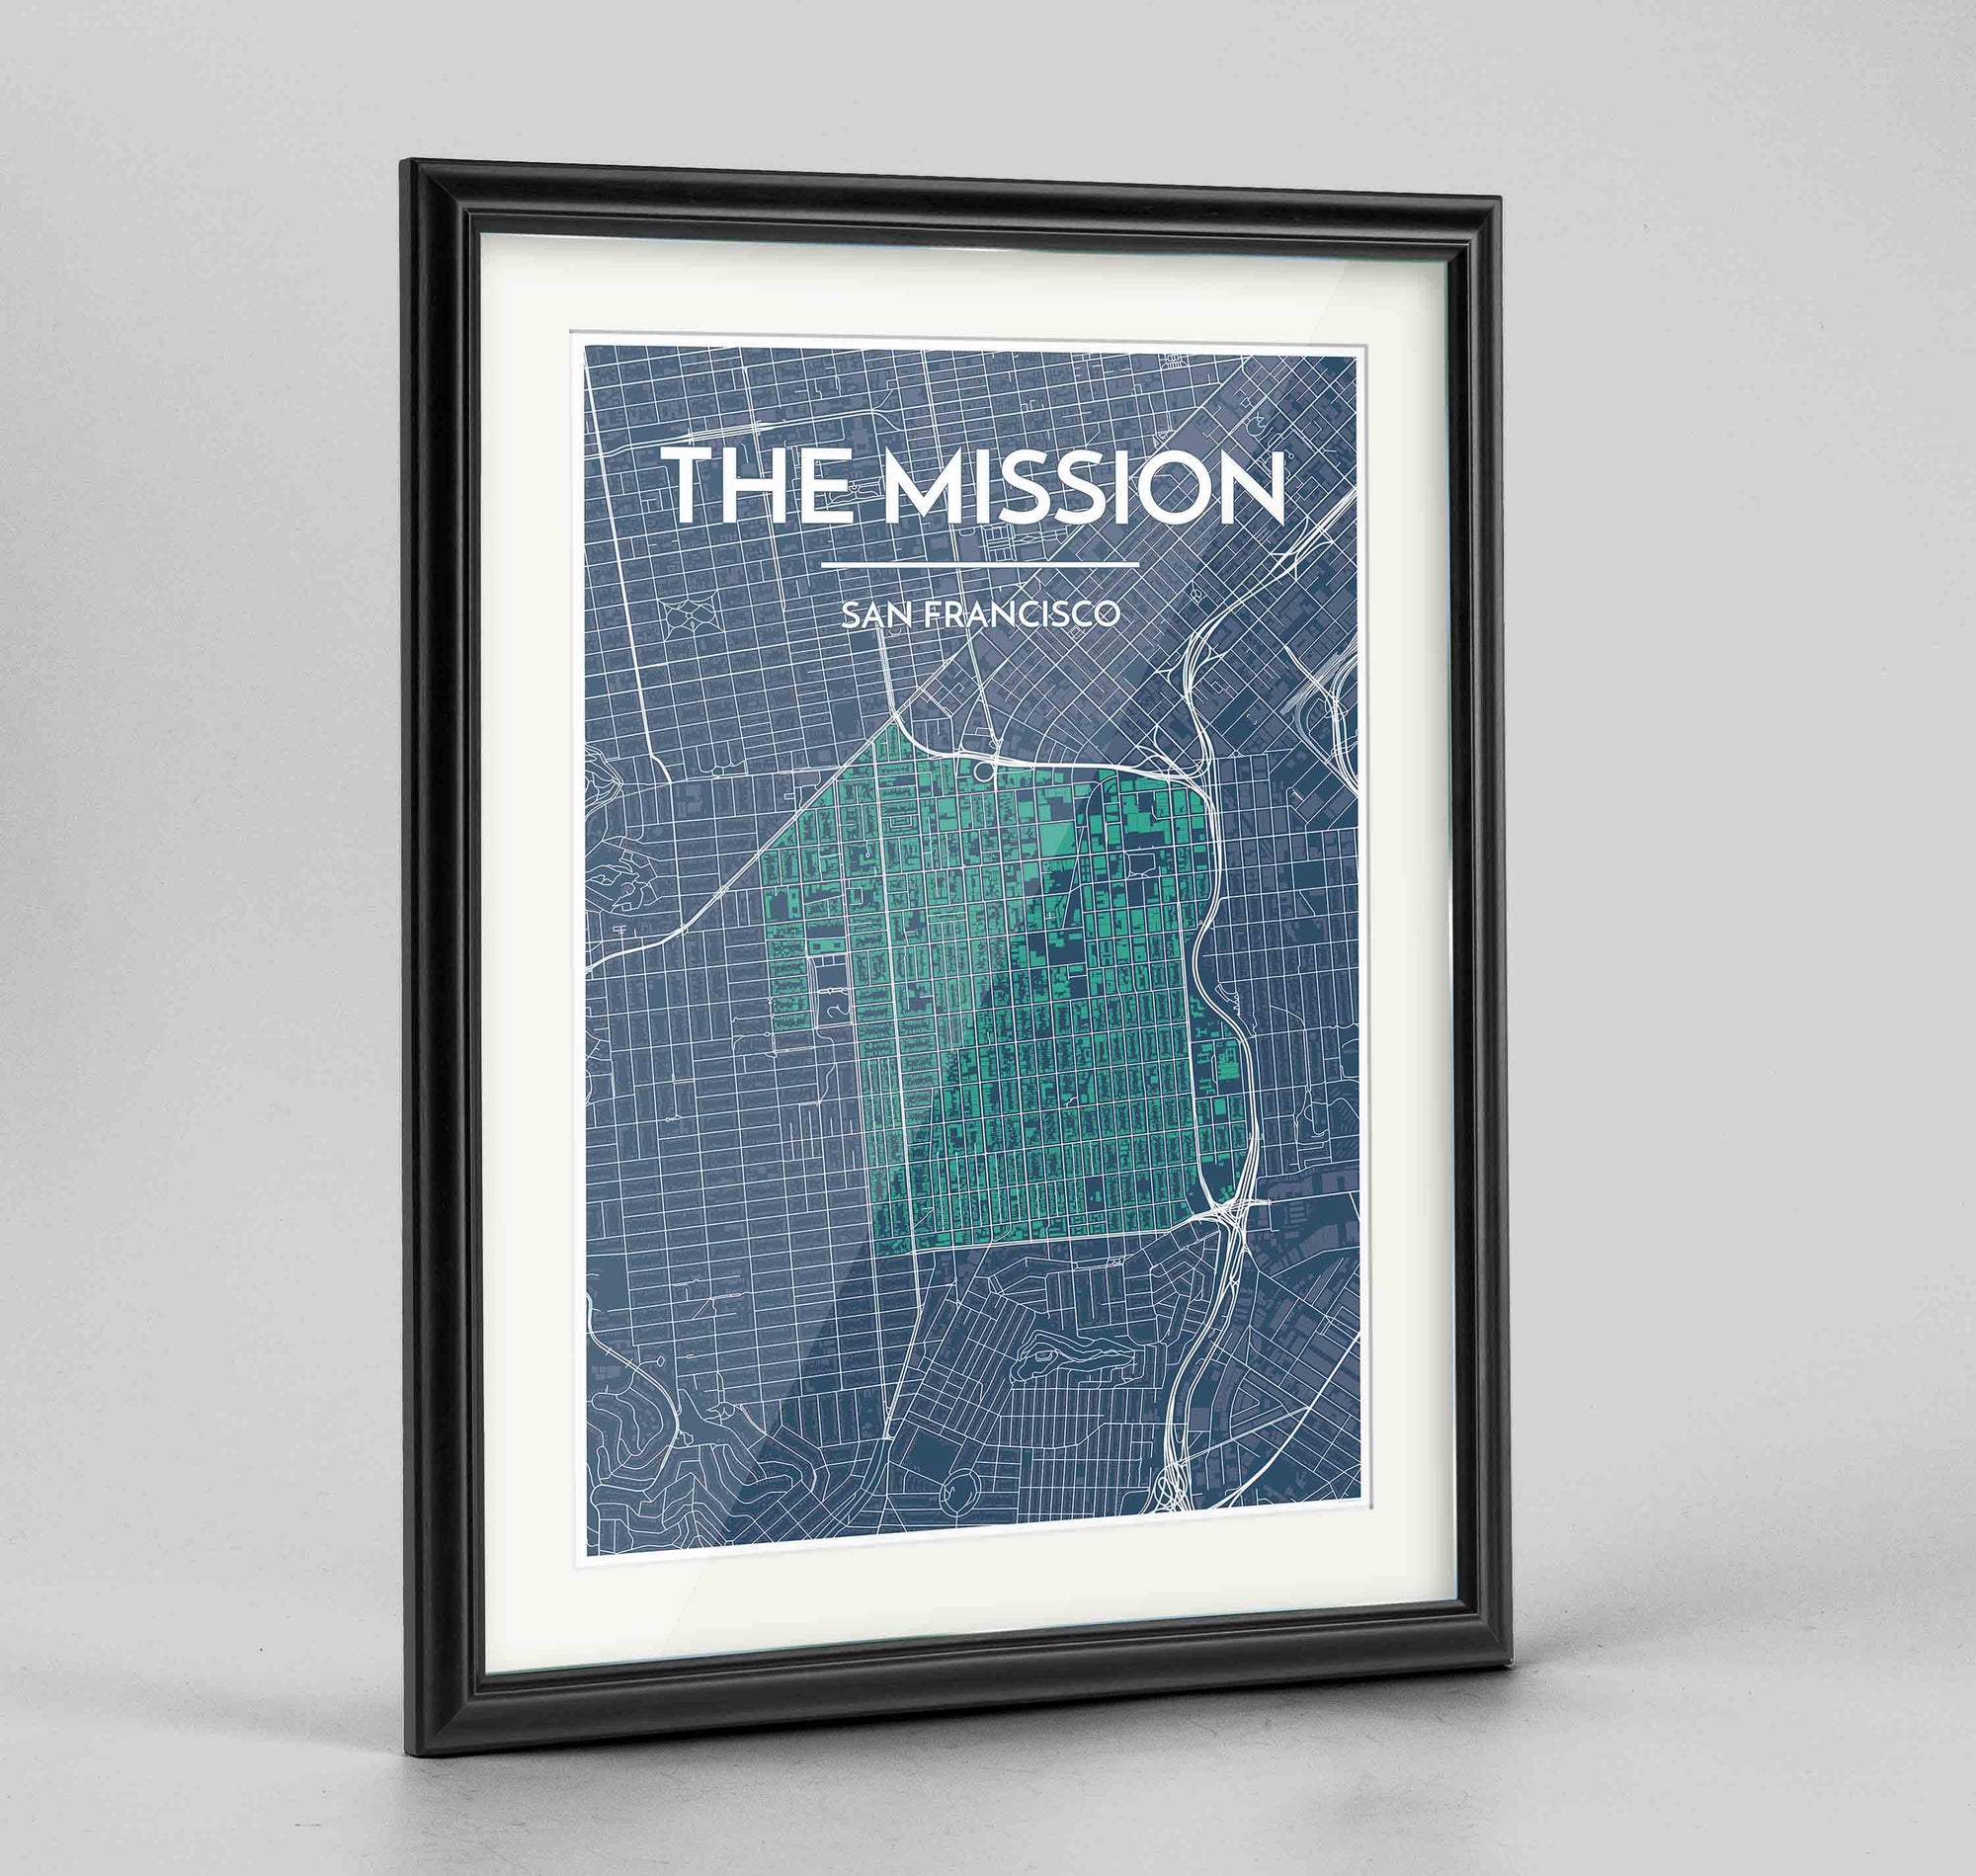 Framed The Mission San Francisco Map Art Print 24x36" Traditional Black frame Point Two Design Group